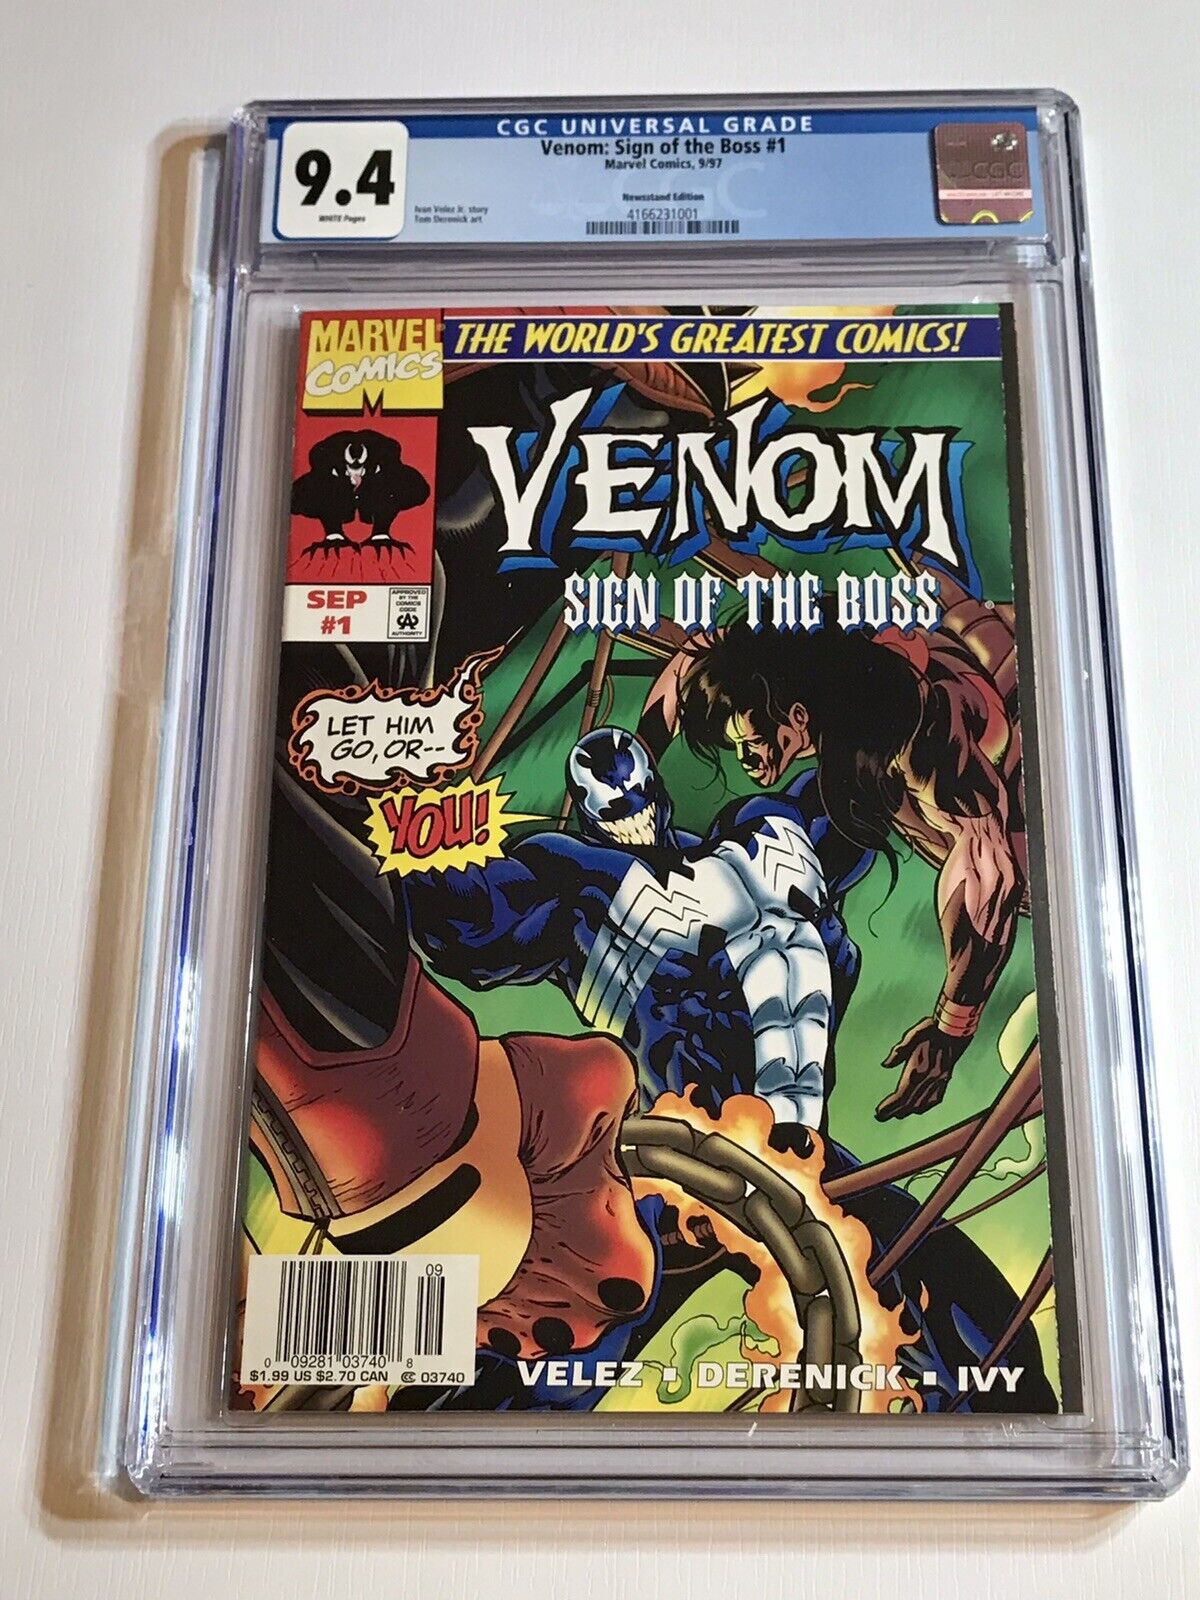 1997 VENOM: SIGN OF THE BOSS #1 WITH GHOST RIDER RARE NEWSSTAND VARIANT CGC 9.4